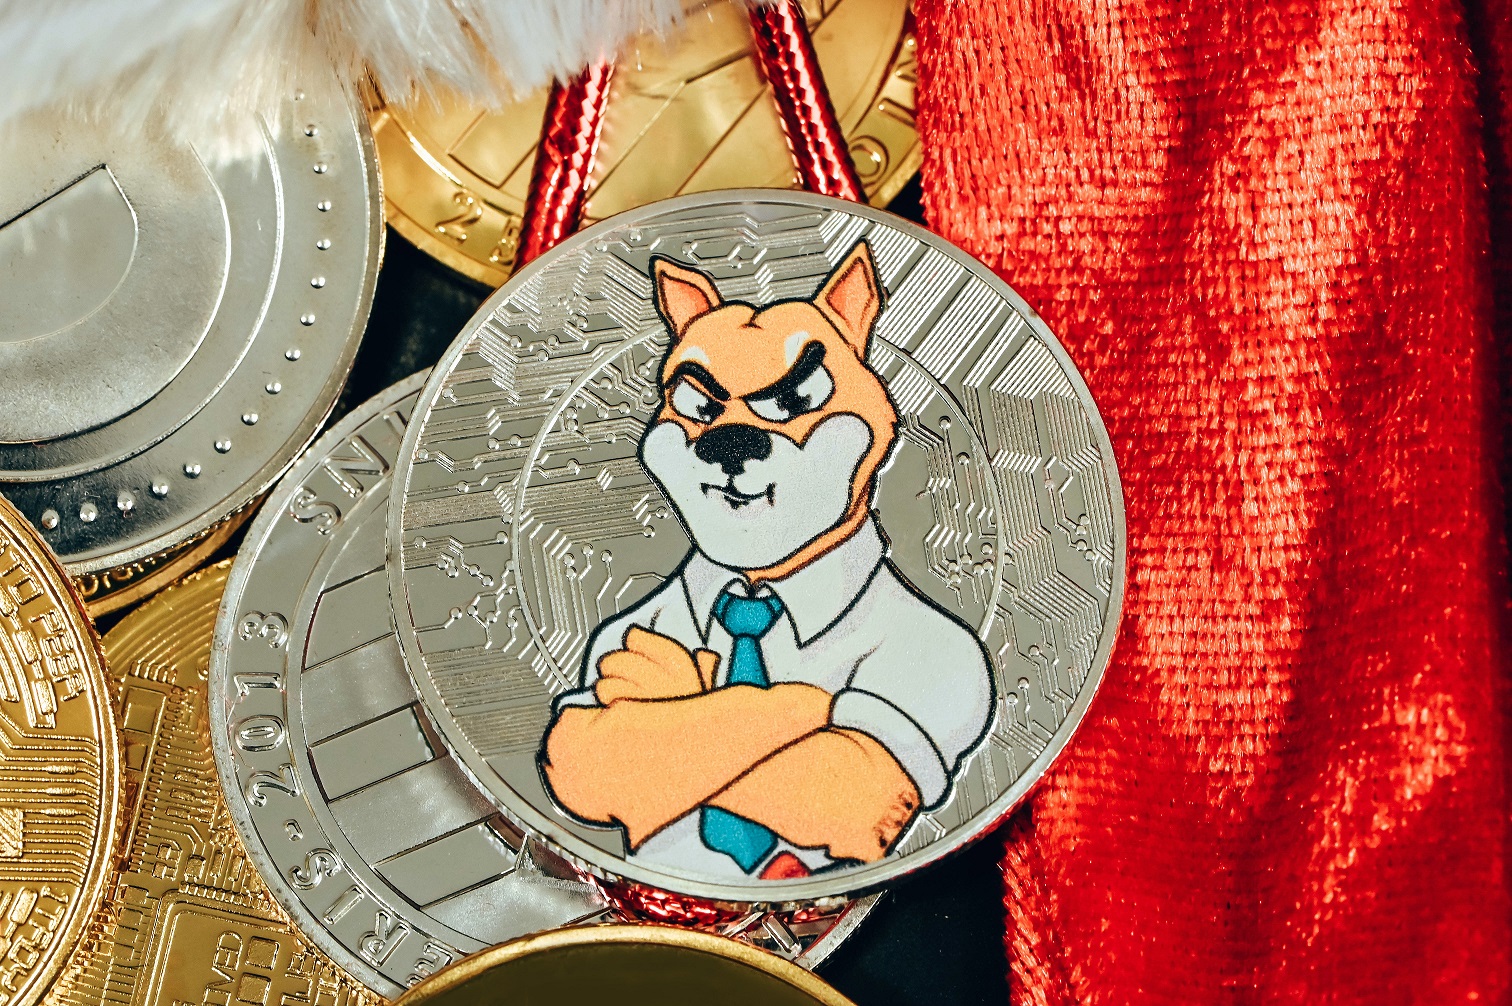 Memecoin Battle: Shiba Inu’s Monthly Gains Stand at 18% While Dogecoin Sees Only 2% Profits